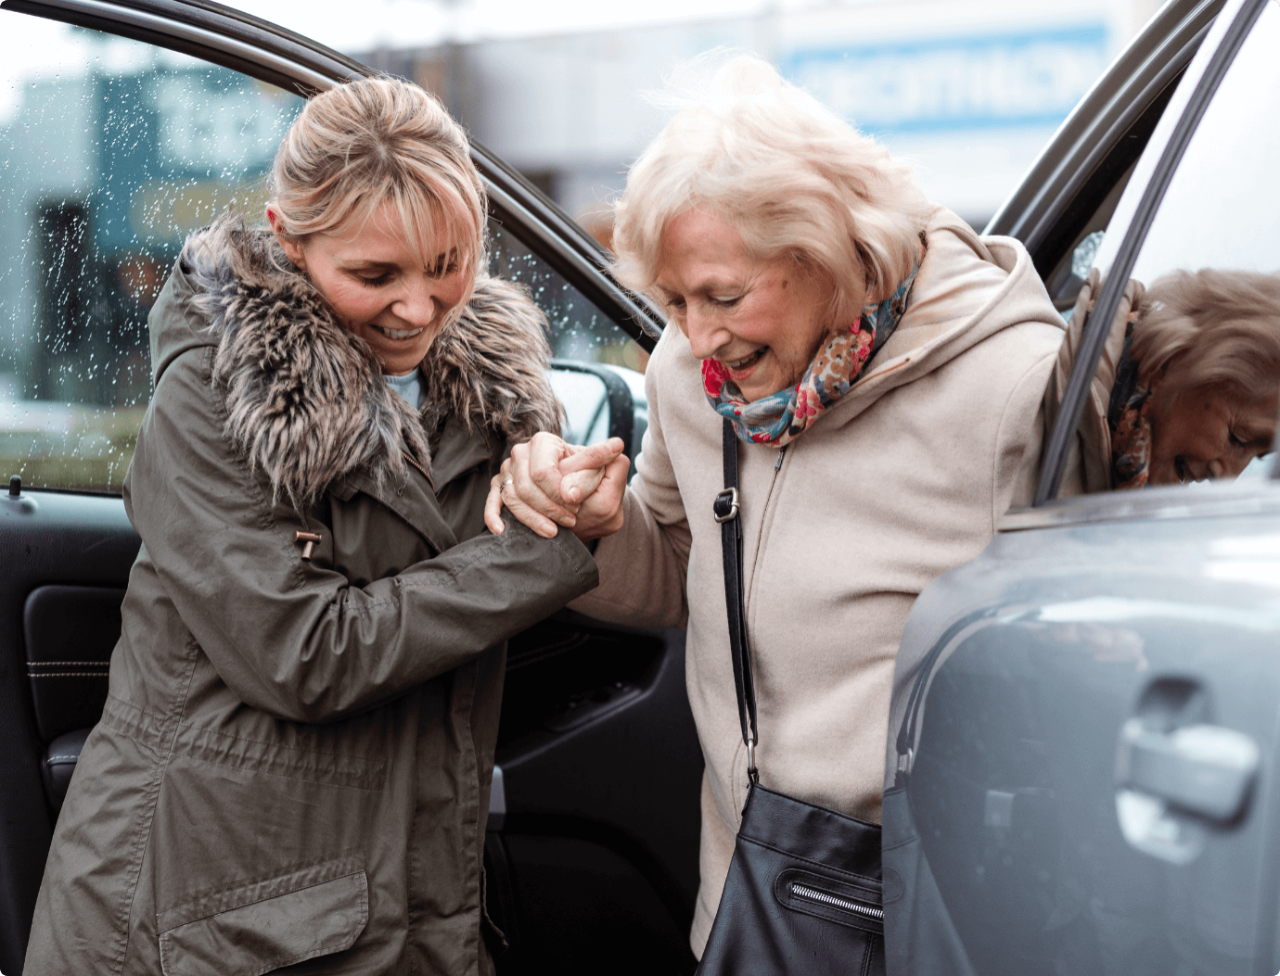 A woman helping another woman to get out of a car.